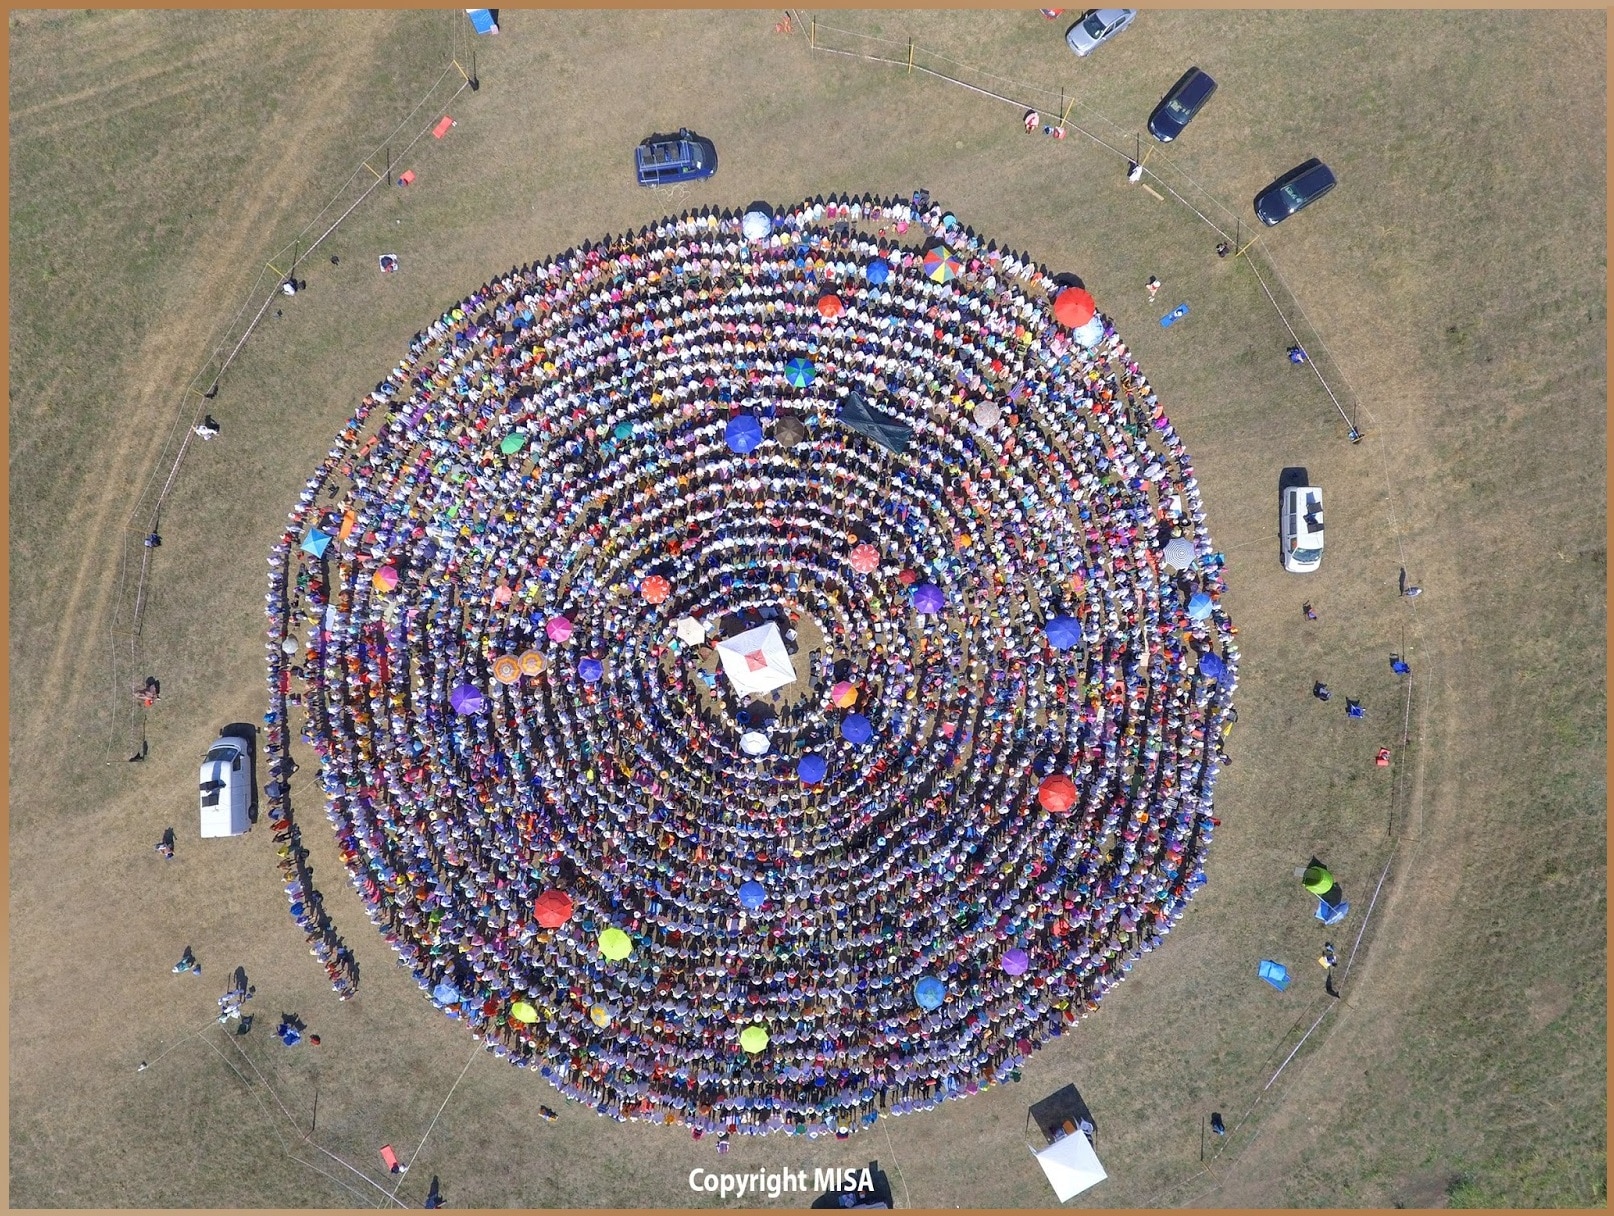 Aerial view of a large spiral formation created by participants at the MISA yoga camp in Costinești, with colorful umbrellas and mats.